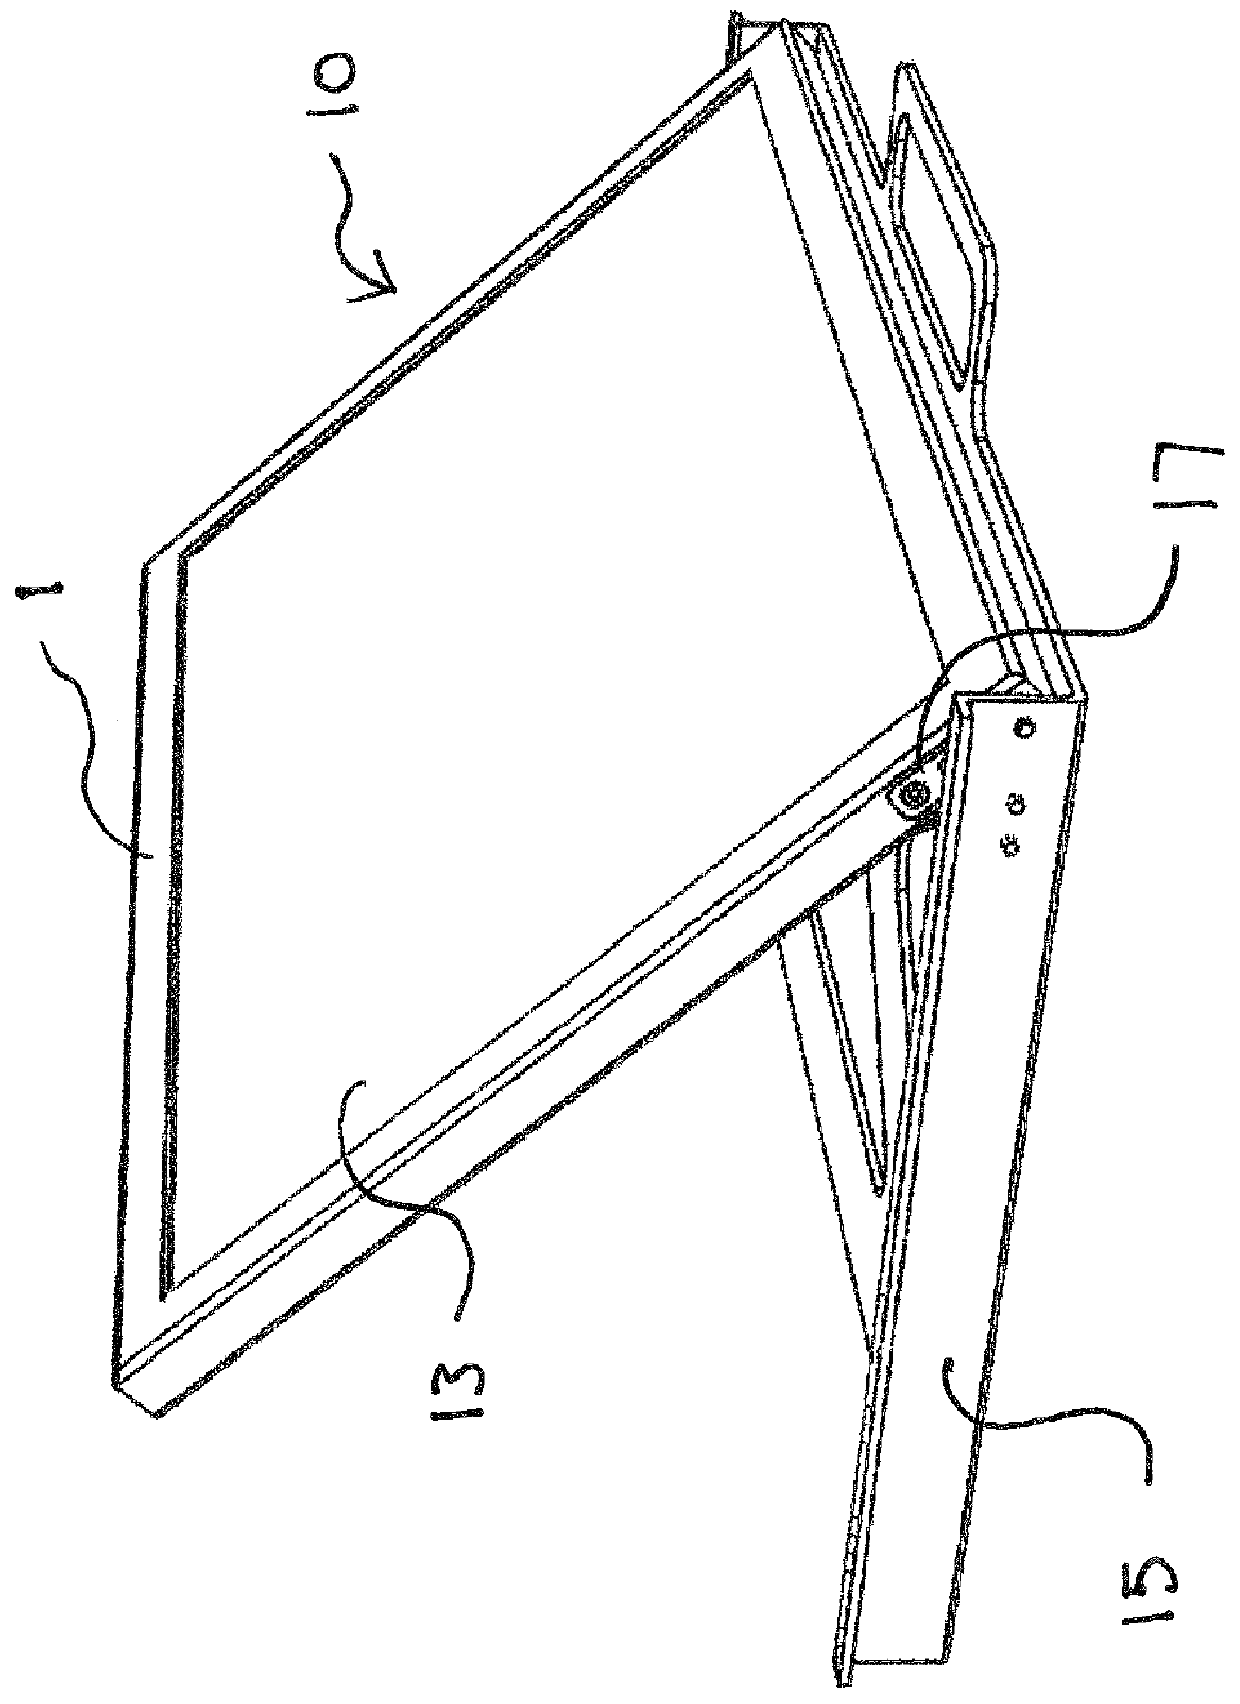 Friction hinge with closed clips